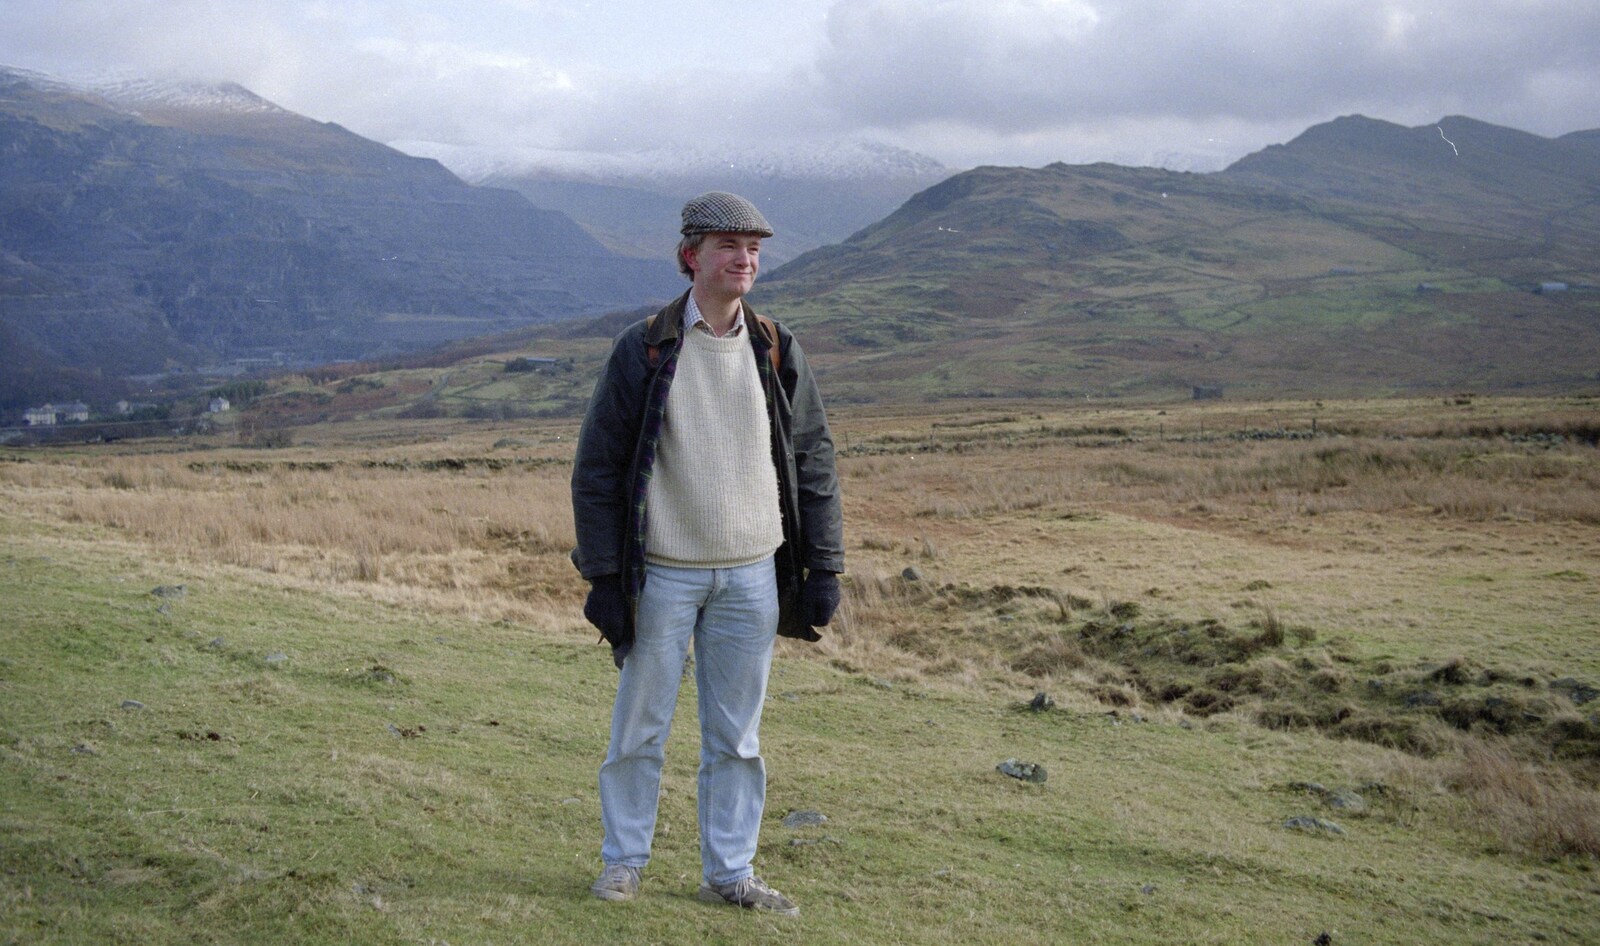 Nosher with a flat cap from Capel Curig to Abergavenny: A Road-Trip With Hamish, Wales - 3rd April 1992